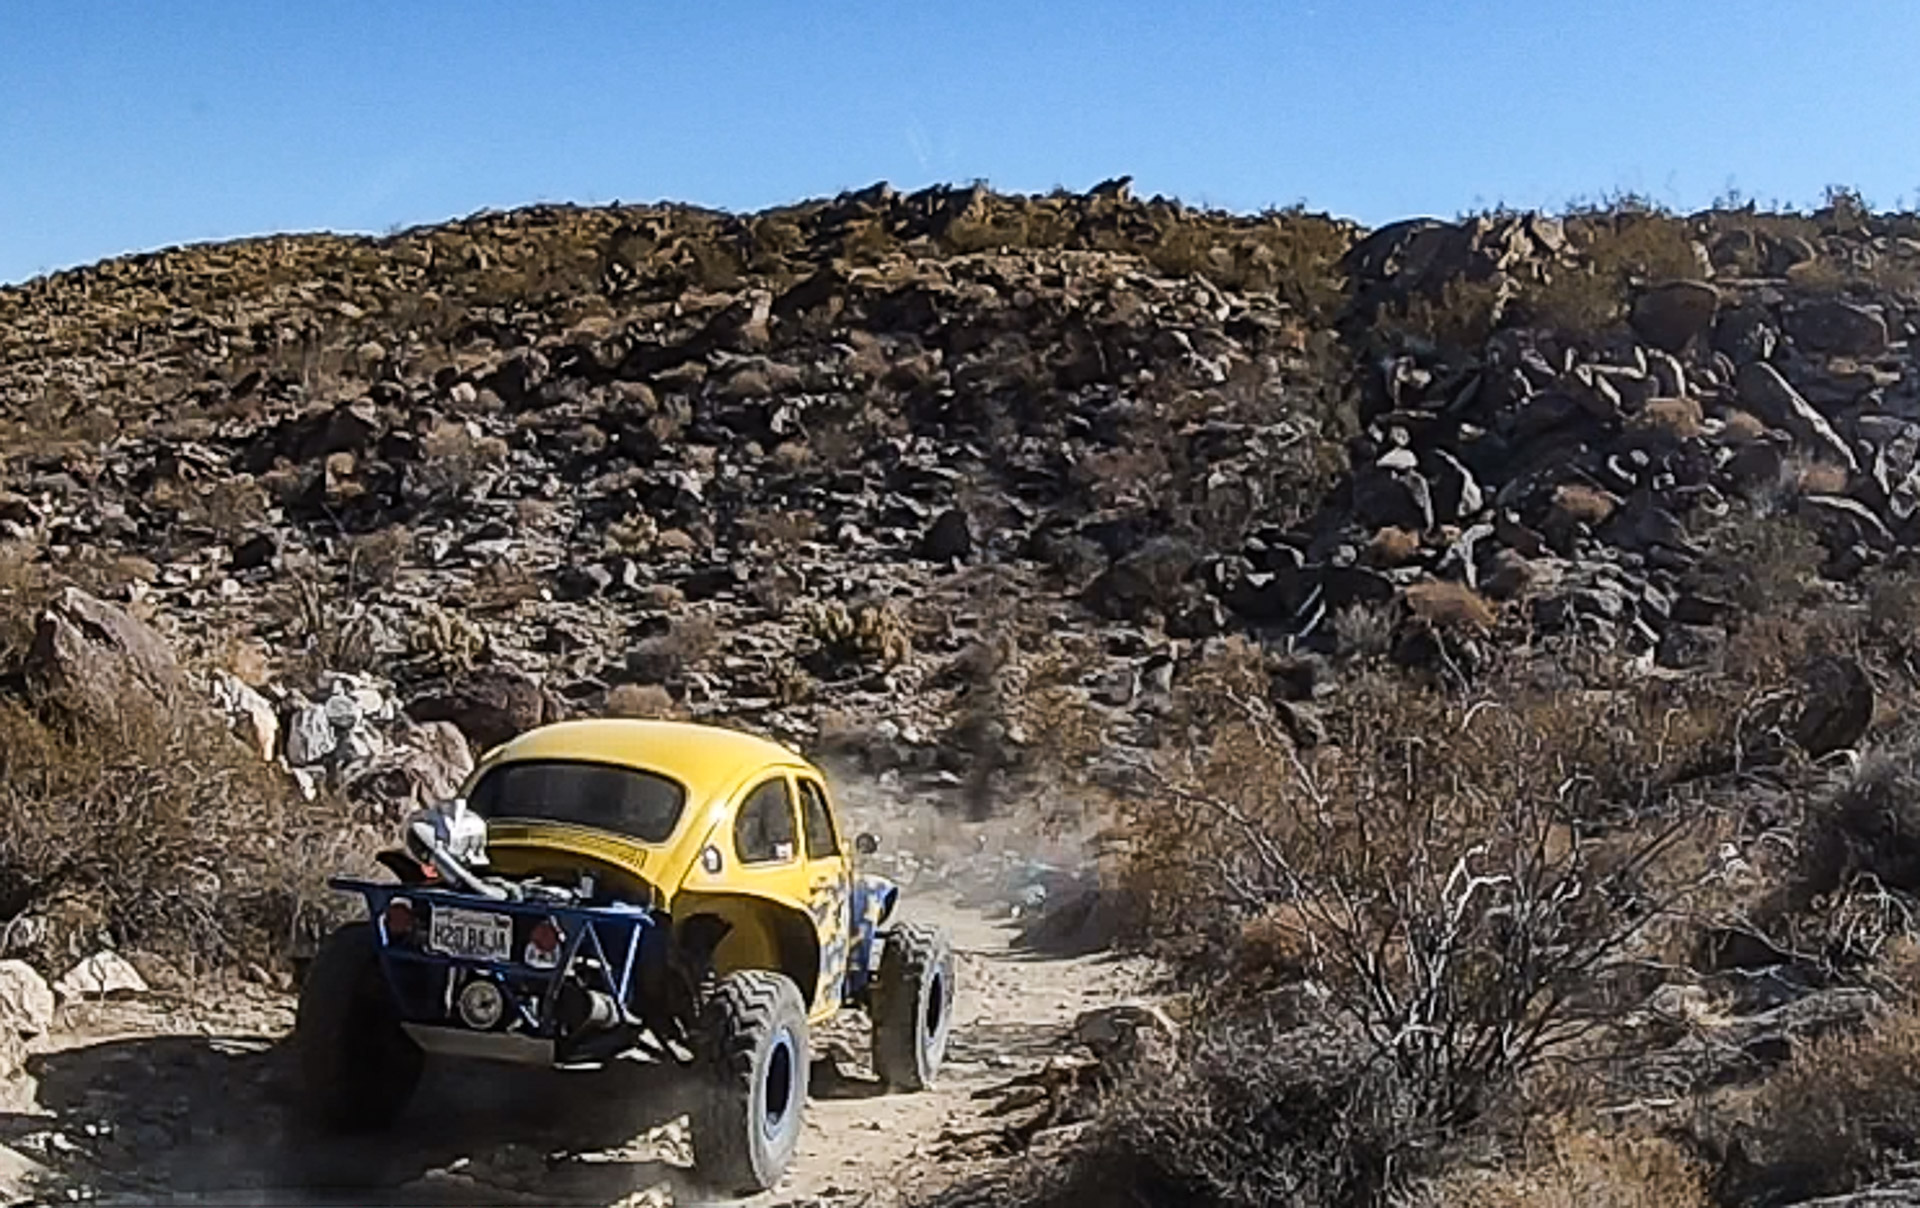 Dune Buggy in Coyote Canyon